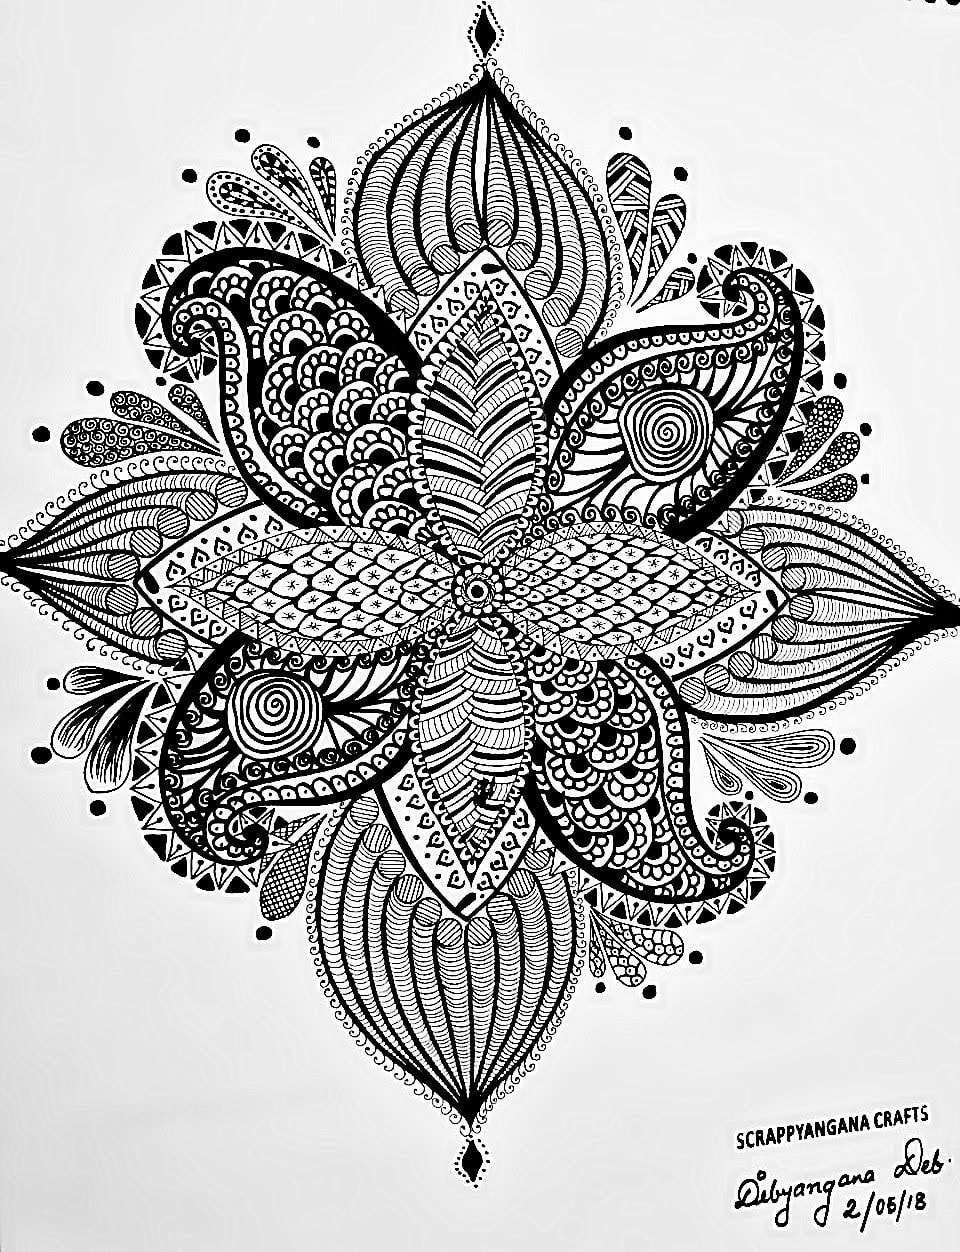 A simple flower sketch design made with specific elements on a white  background 13568182 Vector Art at Vecteezy